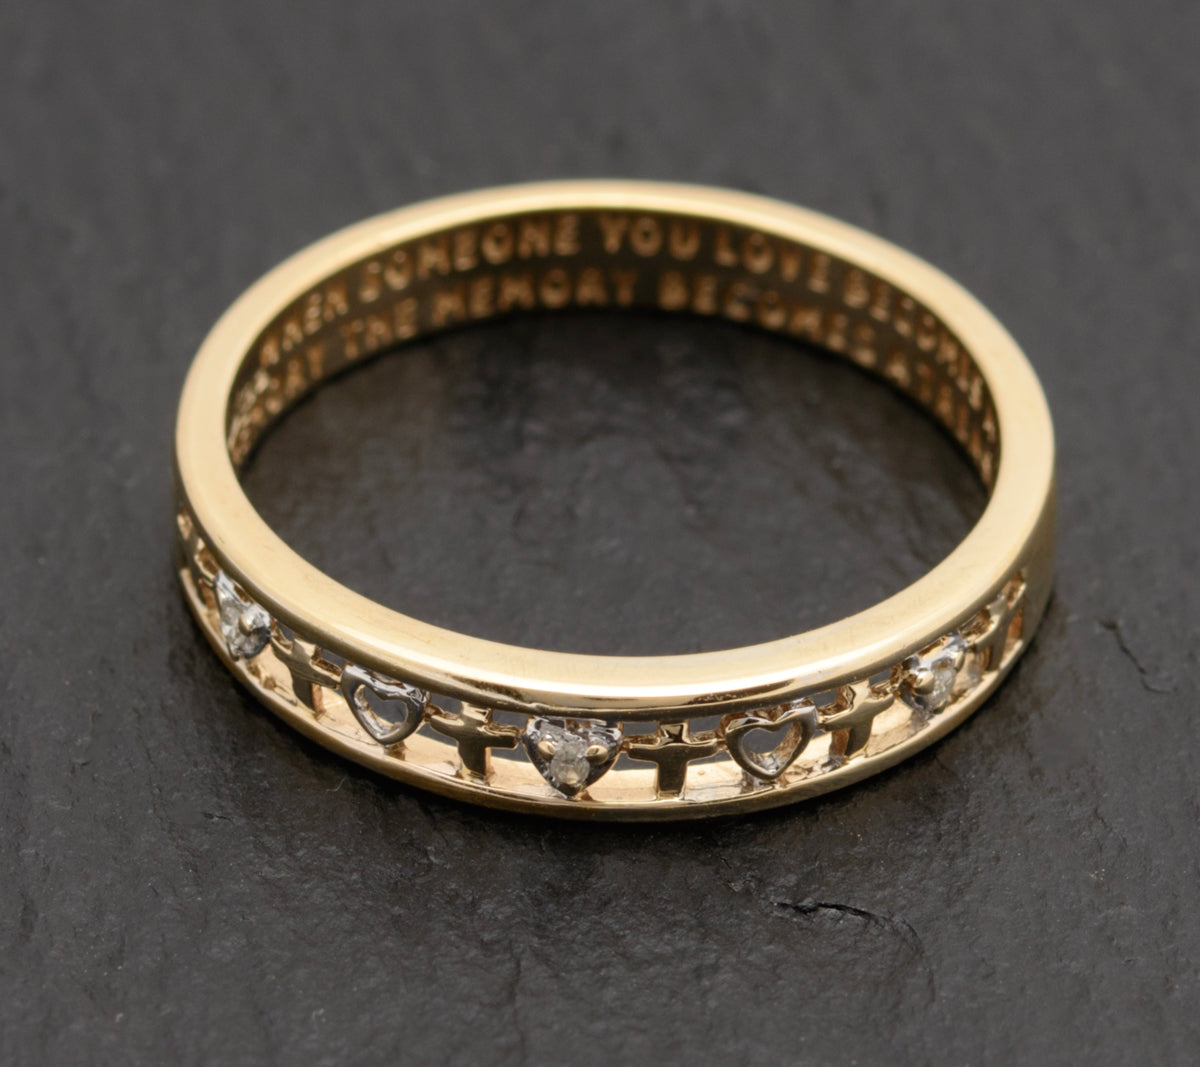 9ct Gold Love Token/Memory Motto Ring With Diamonds & Hearts UK Size S (A1747)